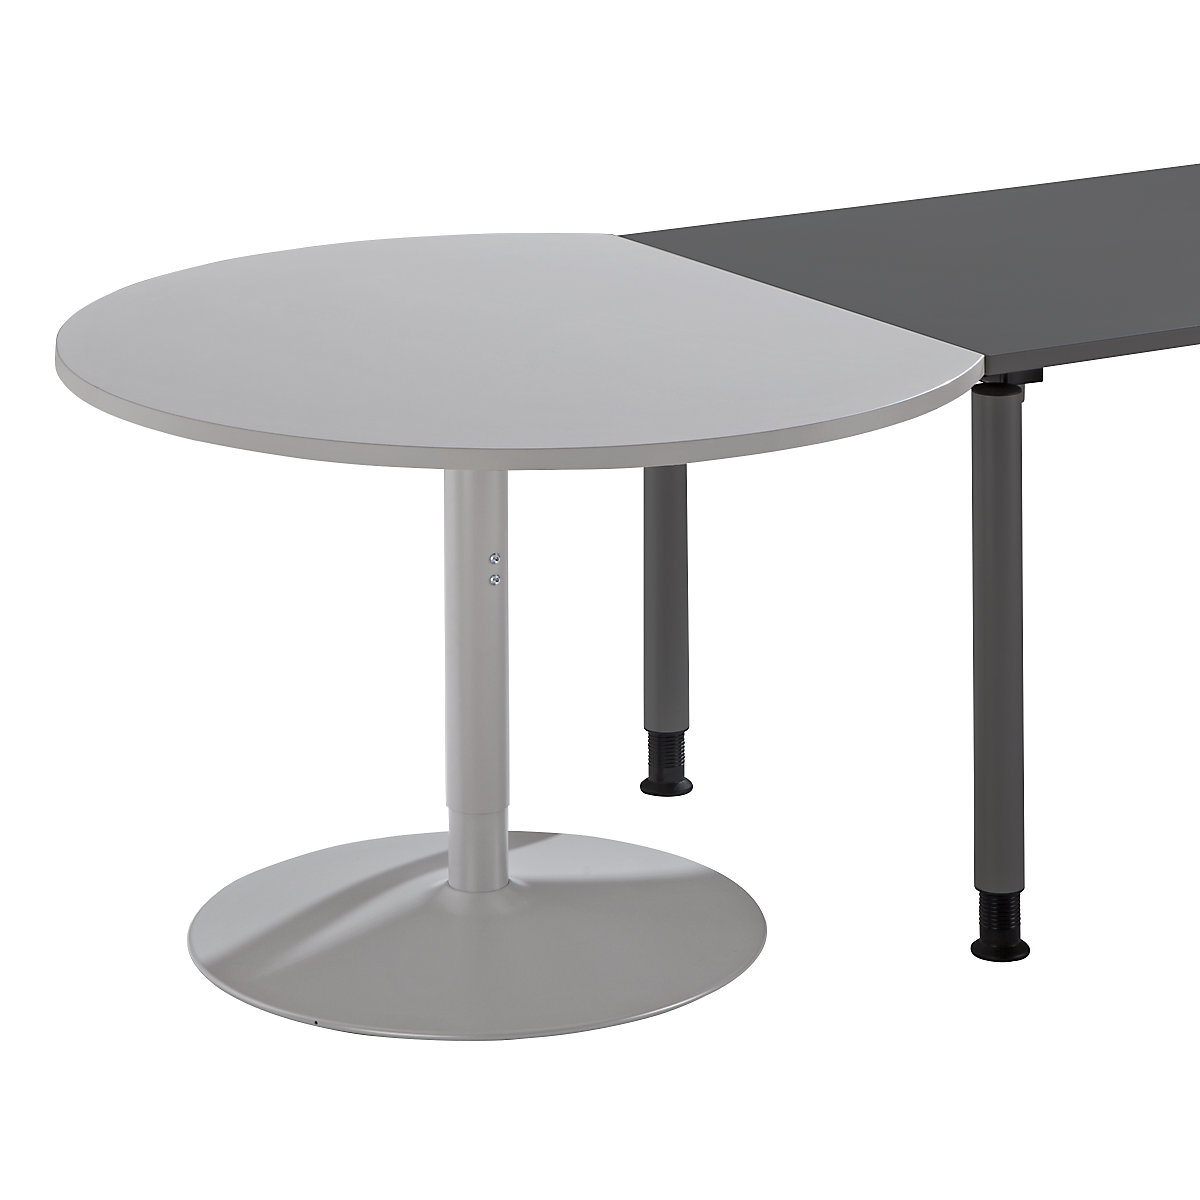 Add-on table THEA, with round base, light grey-5